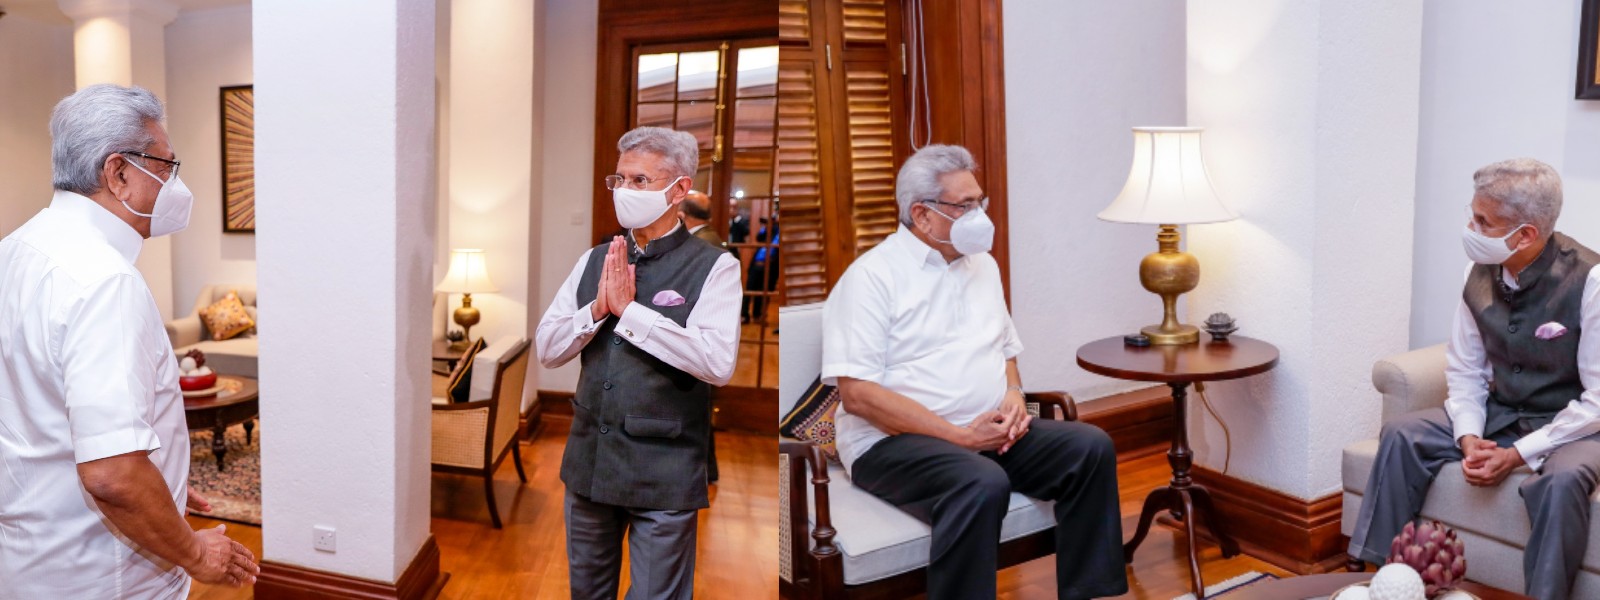 SL will be given priority in Indian COVID vaccine – Jaishankar